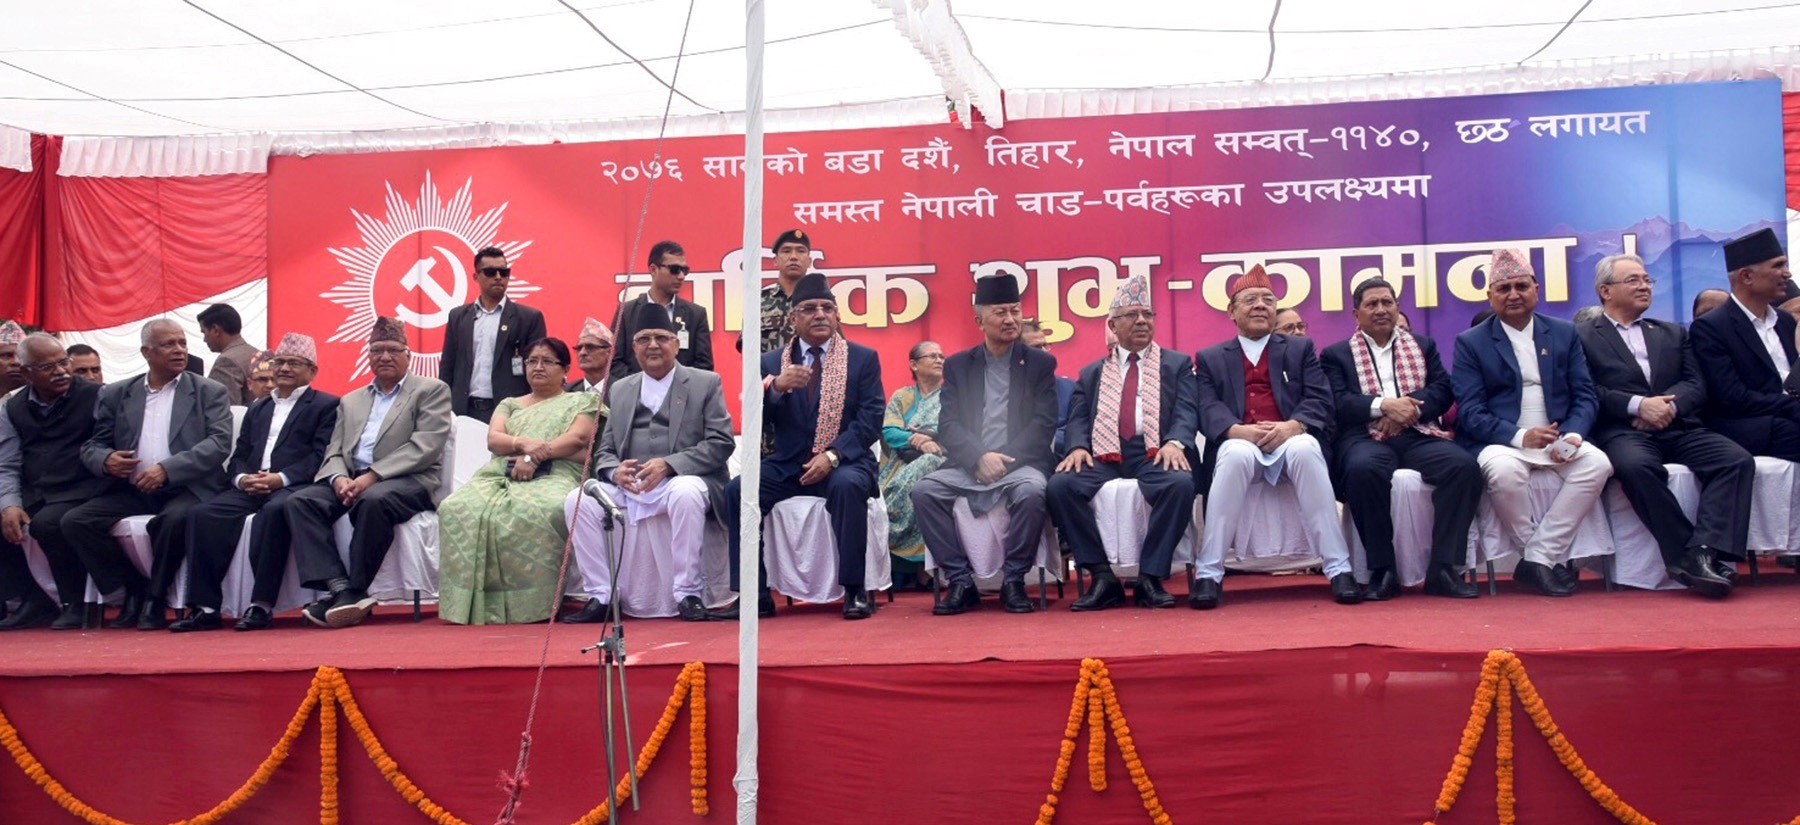 country-finds-way-towards-prosperity-pm-oli